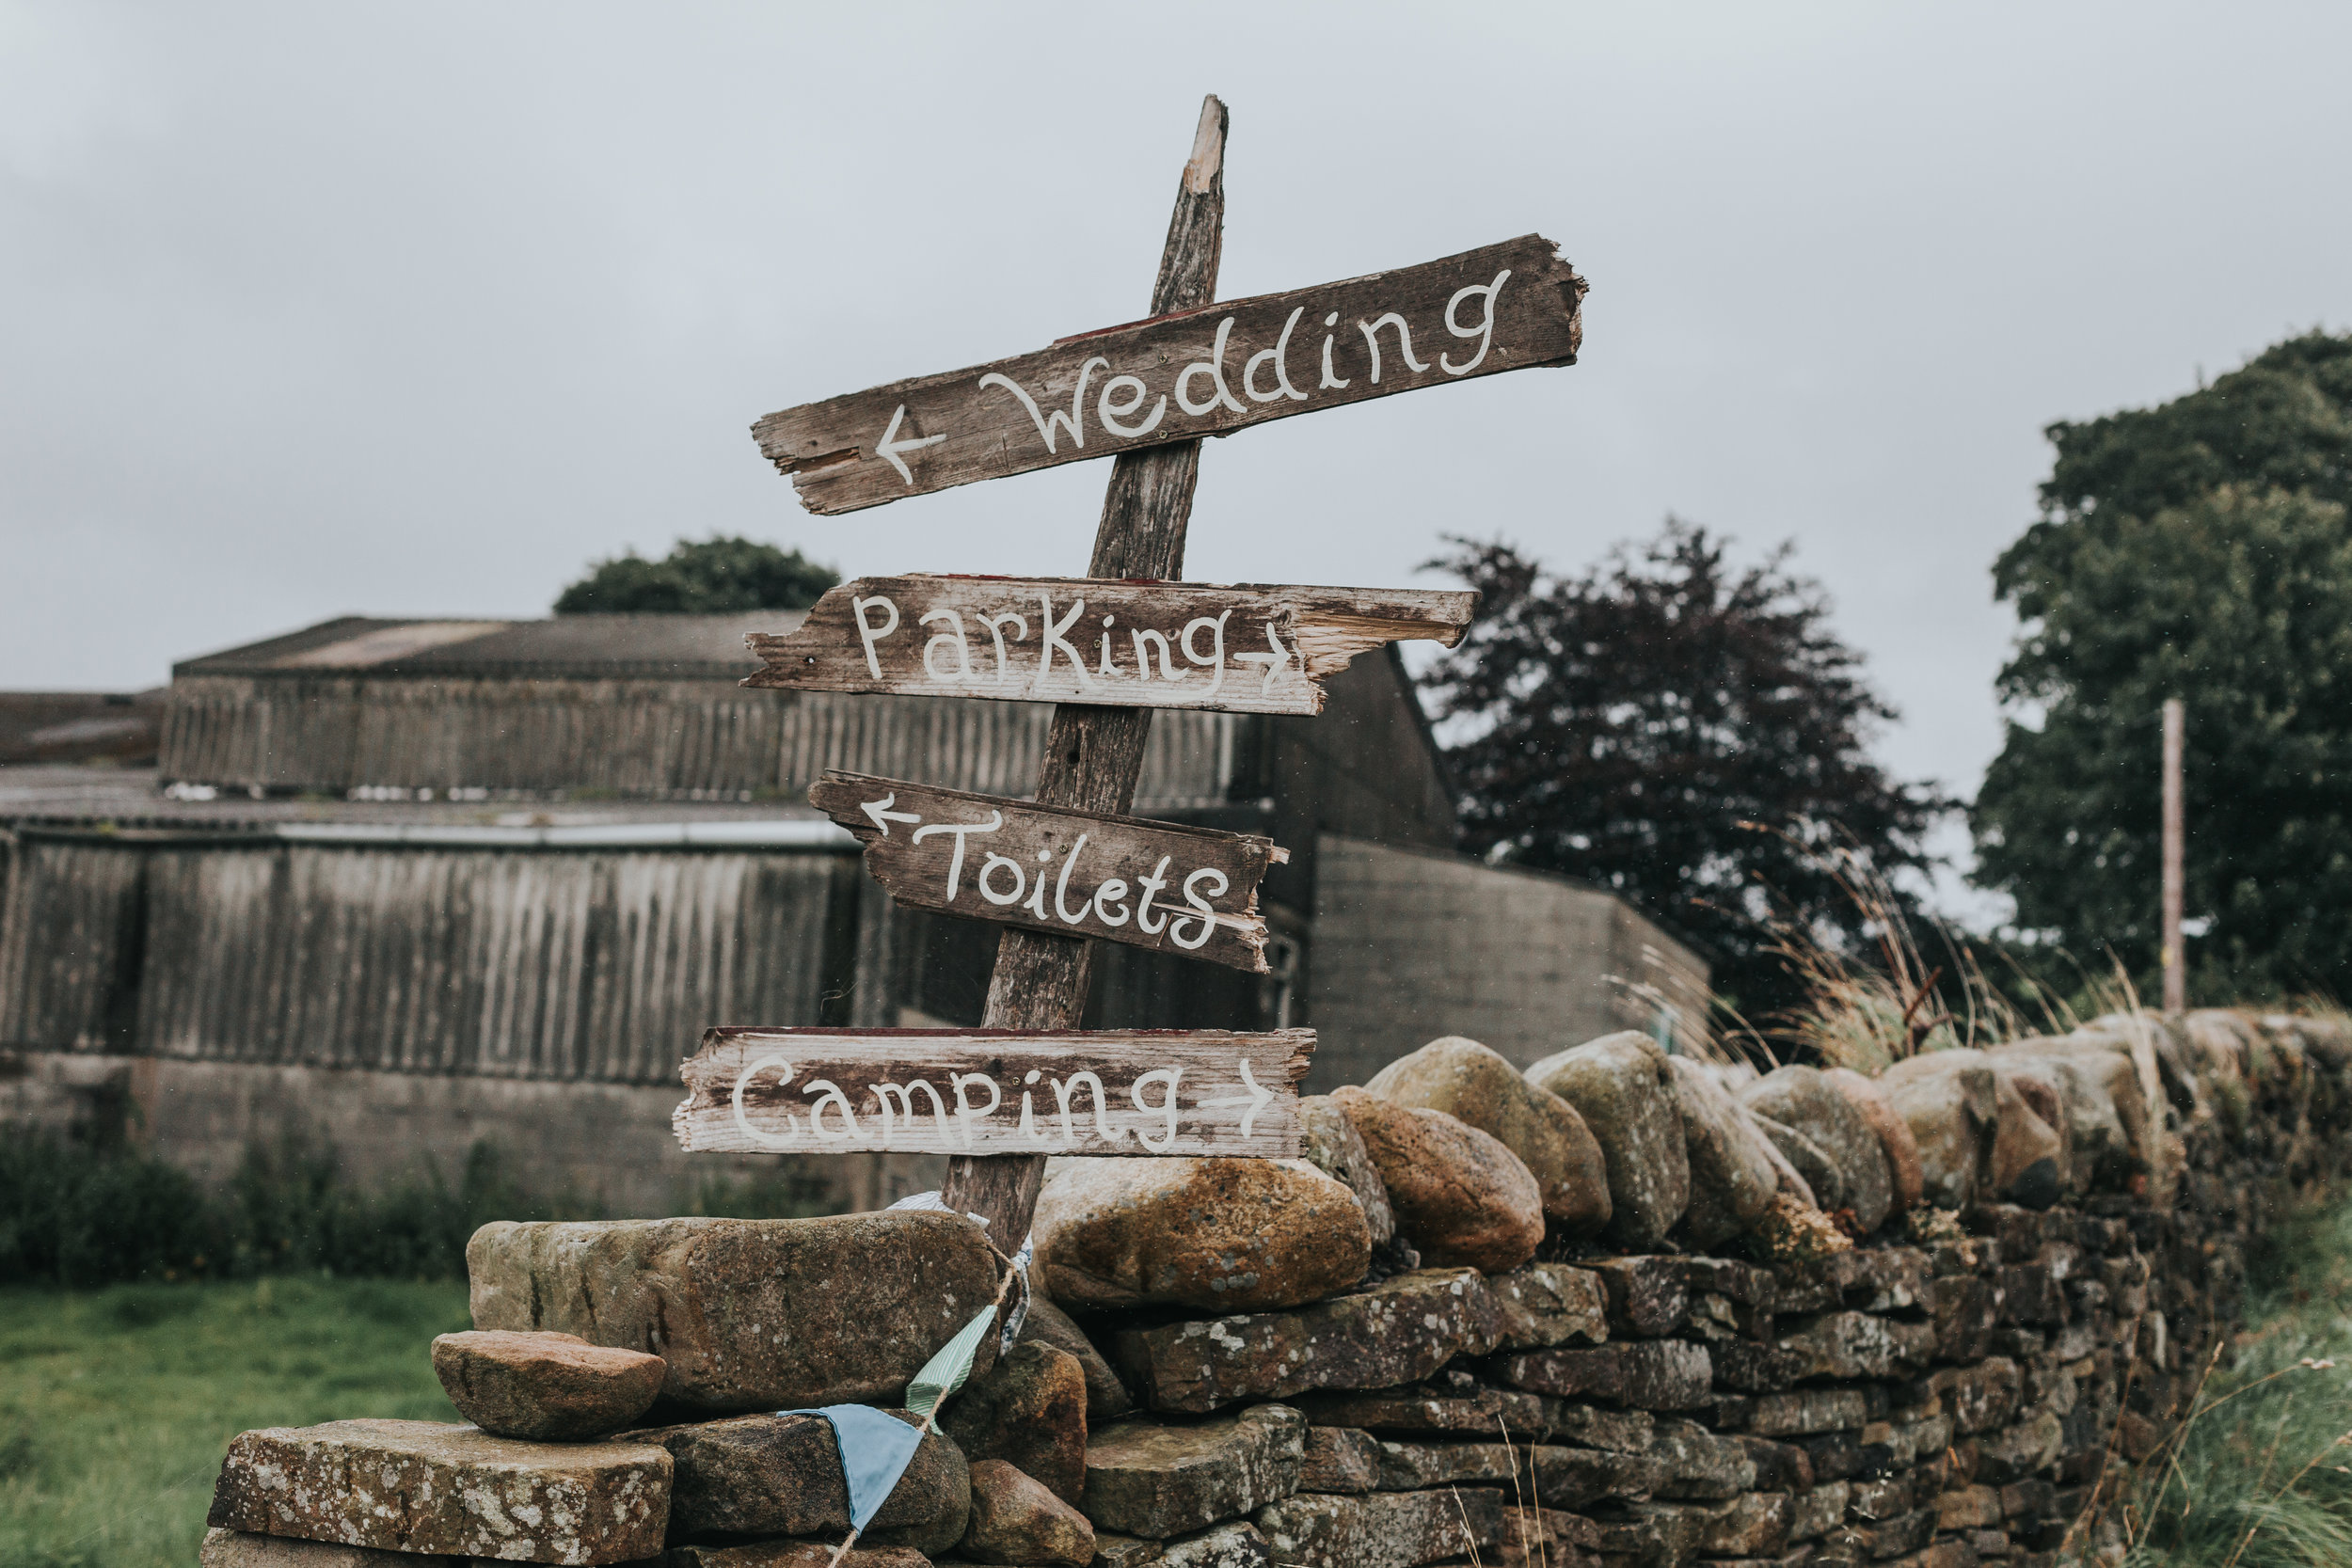  Hand made signs on wood reading WEDDING, PARKING, TOILETS AND CAMPING.&nbsp; 